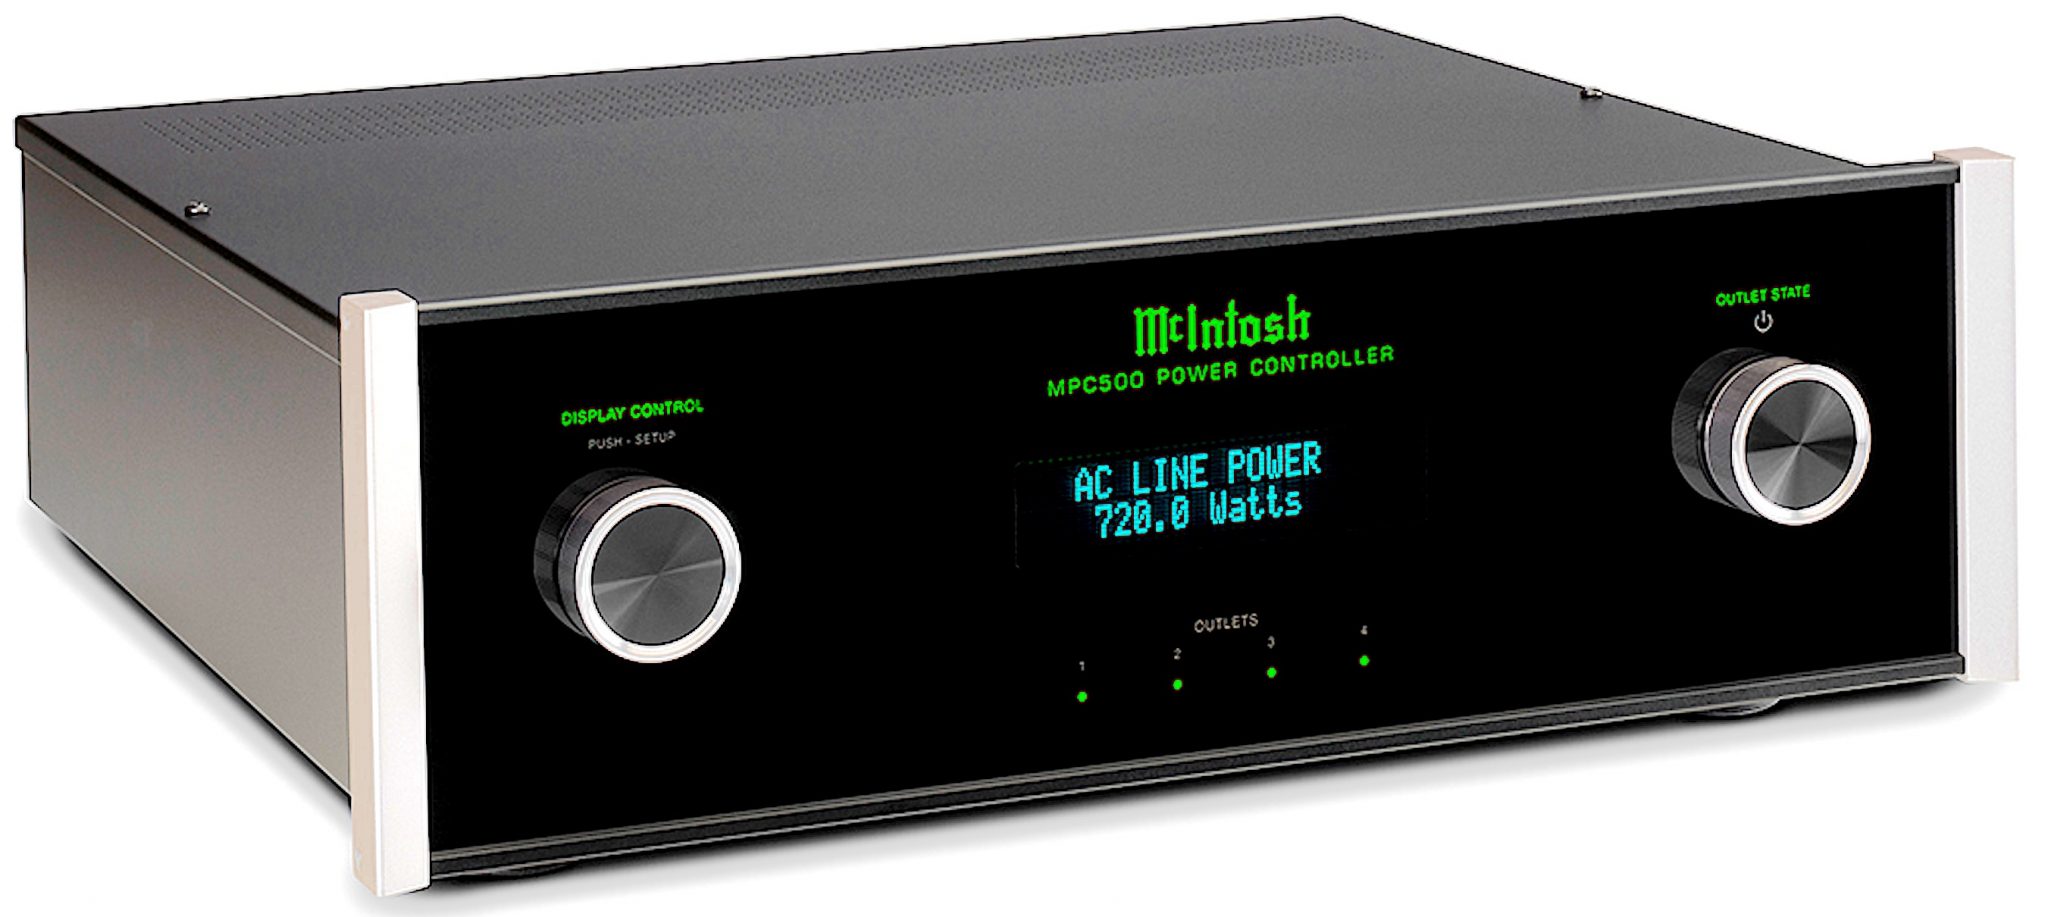 MPC500 Power Controller From McIntosh